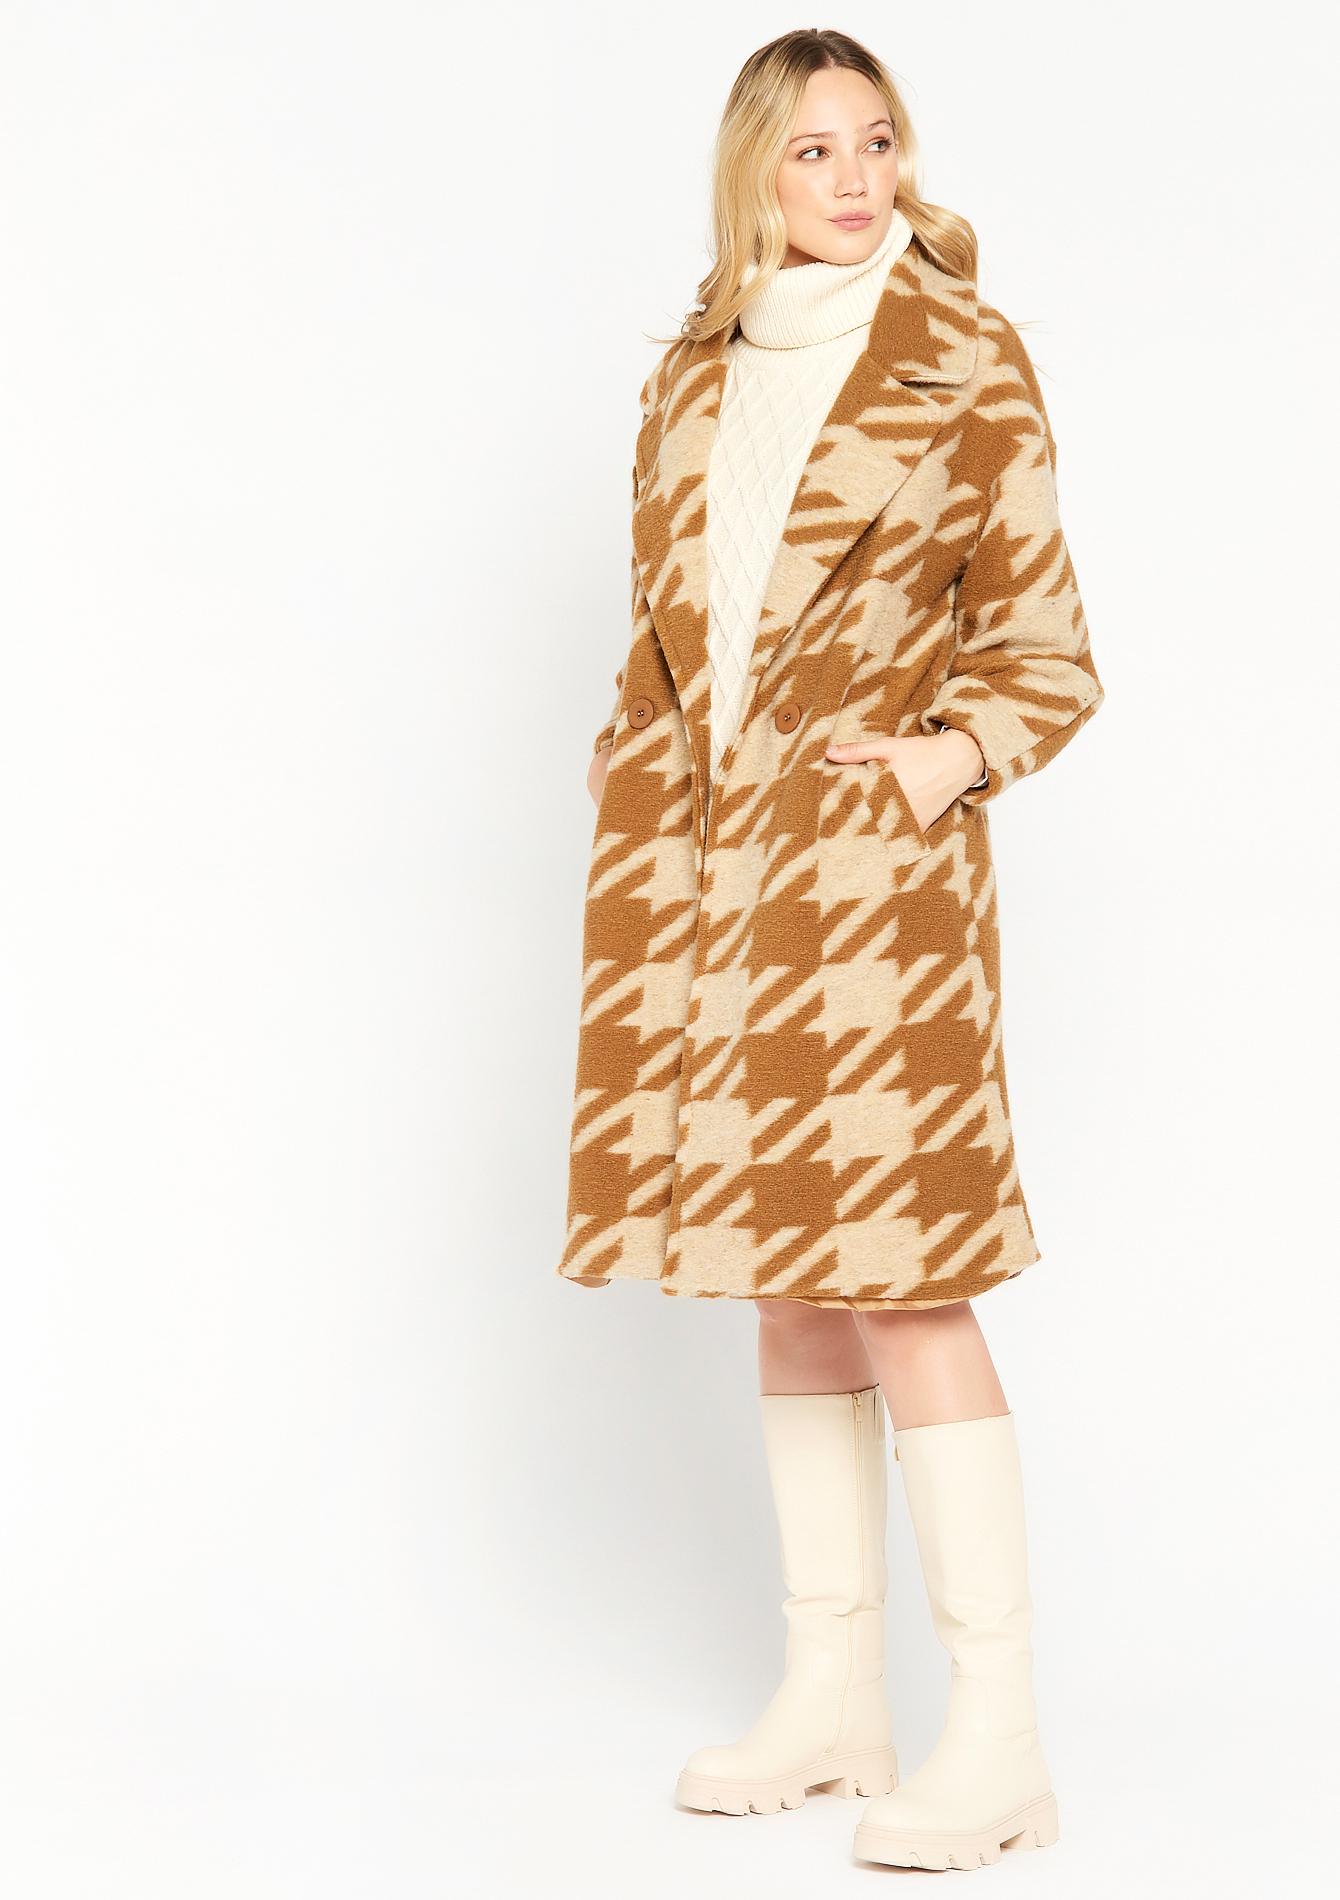 Oversized coat in graphic print - BEIGE & OFF WHITE - 23000426_1938